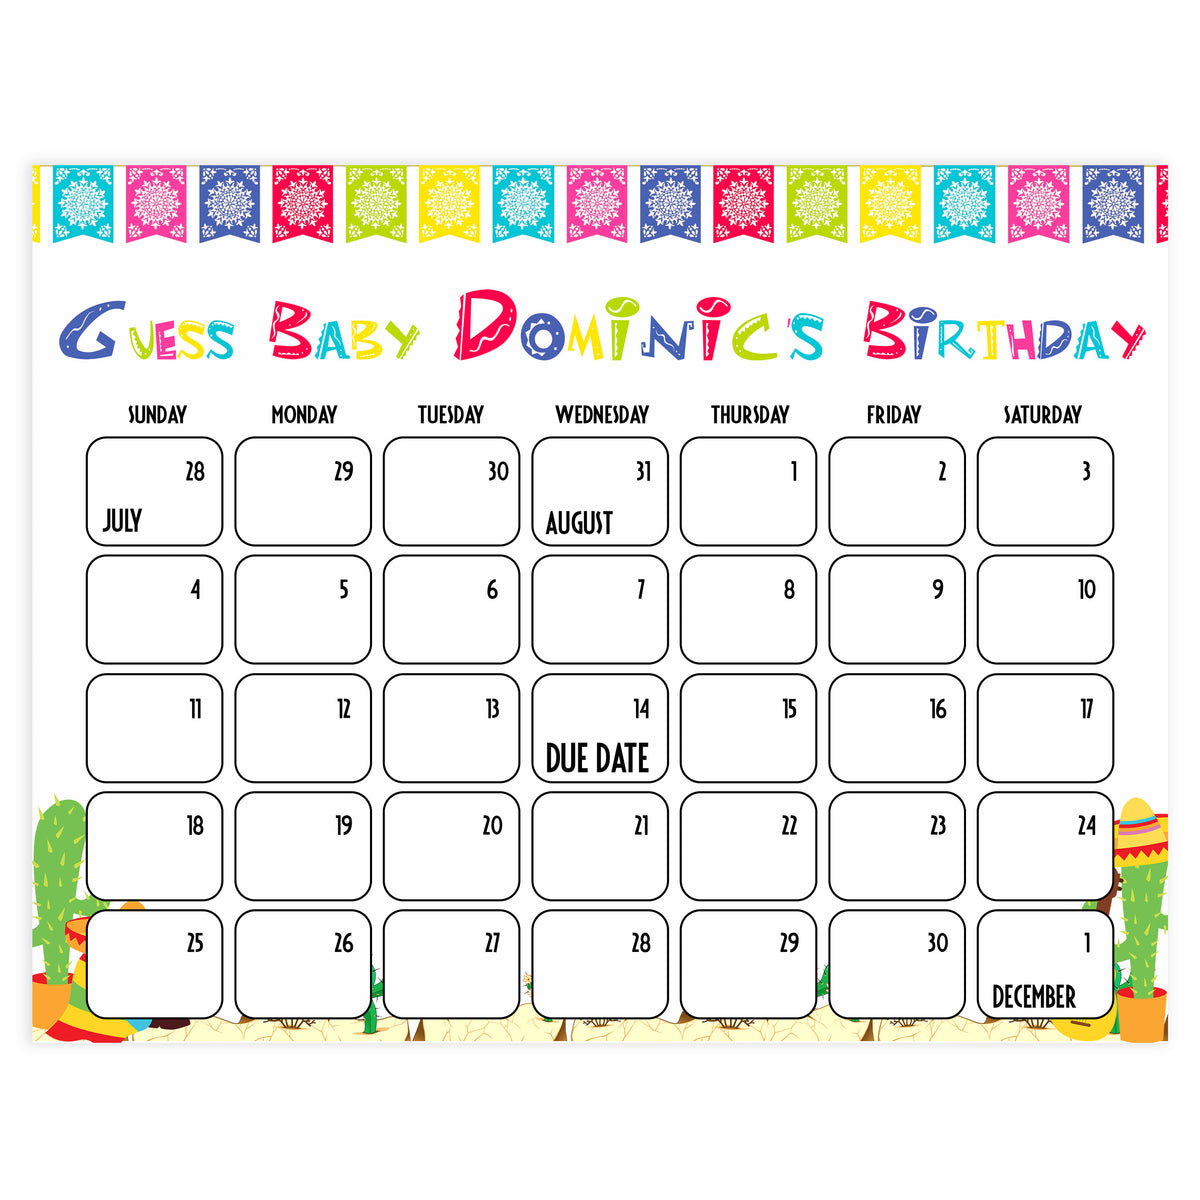 guess the baby birthday game, baby birthday predictions game, Printable baby shower games, Mexican fiesta fun baby games, baby shower games, fun baby shower ideas, top baby shower ideas, fiesta shower baby shower, fiesta baby shower ideas